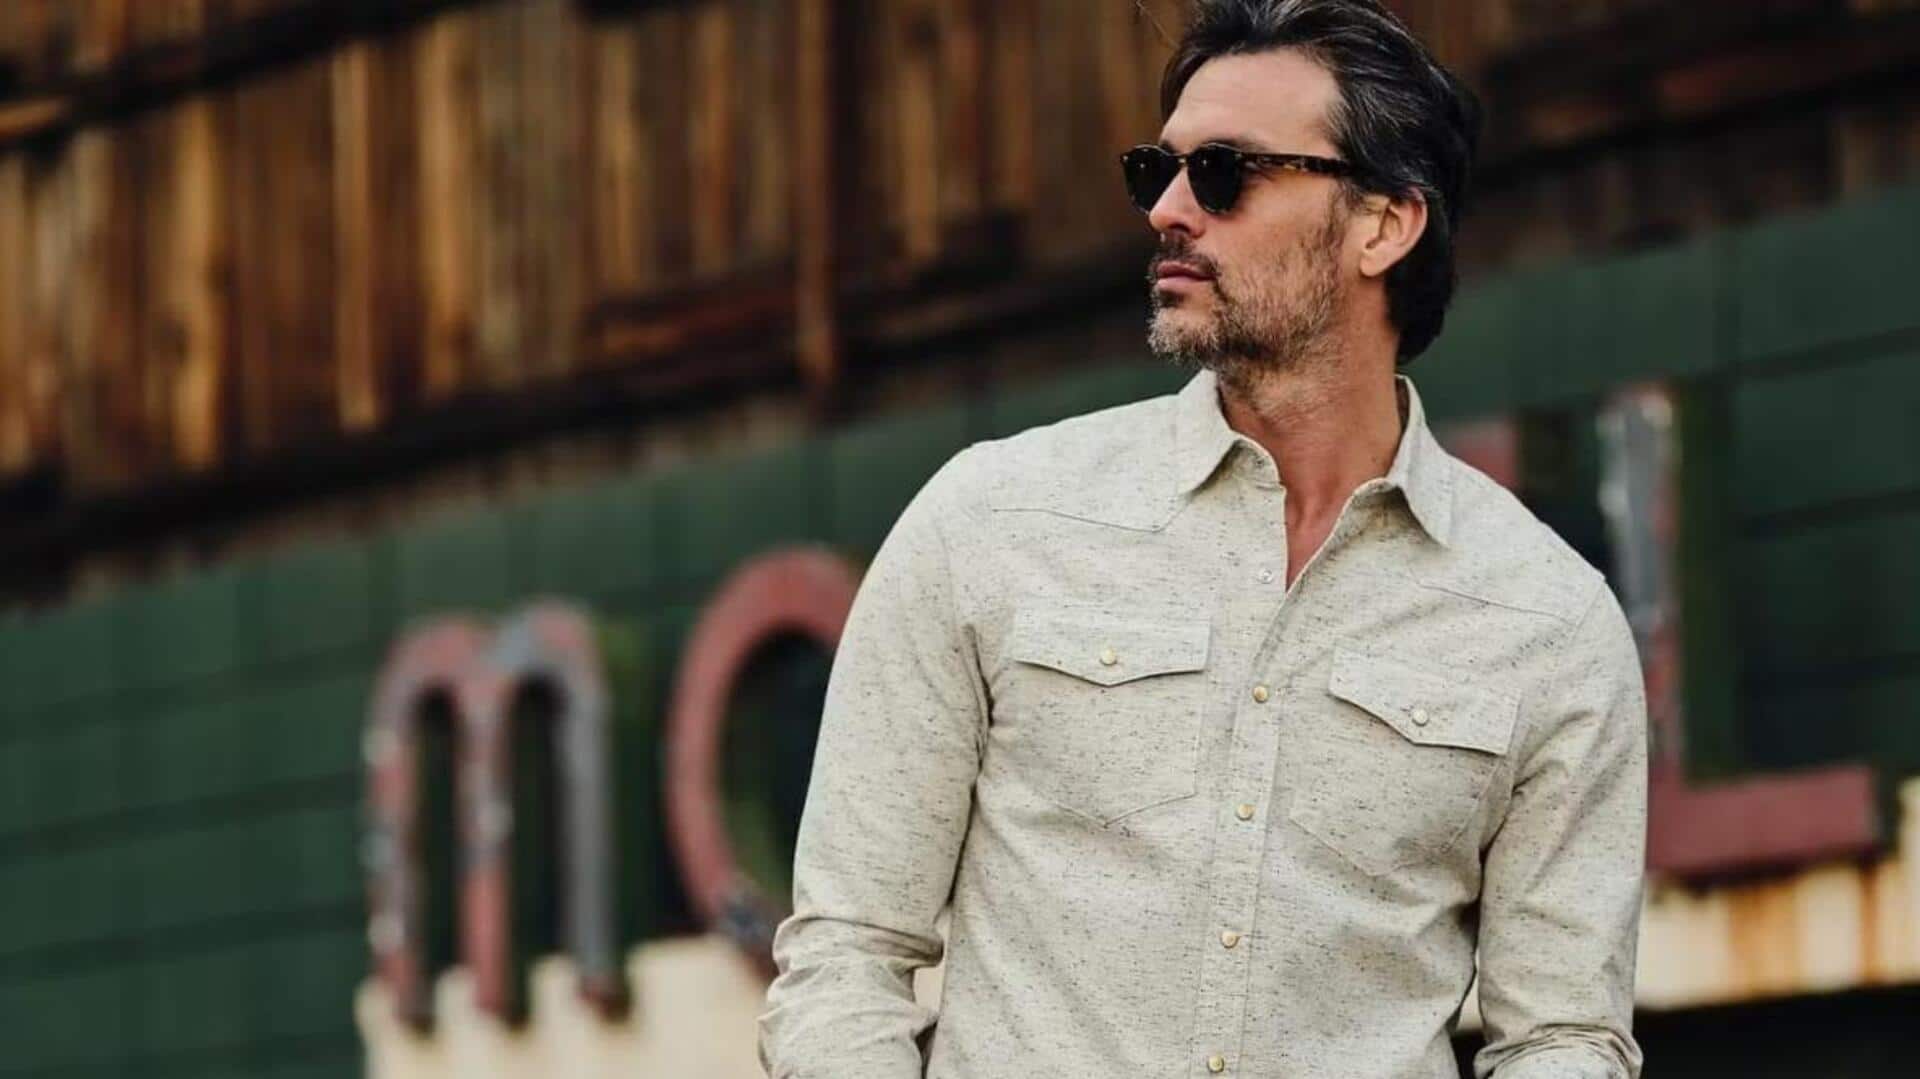 Reinvent your button-down shirt with these style tips